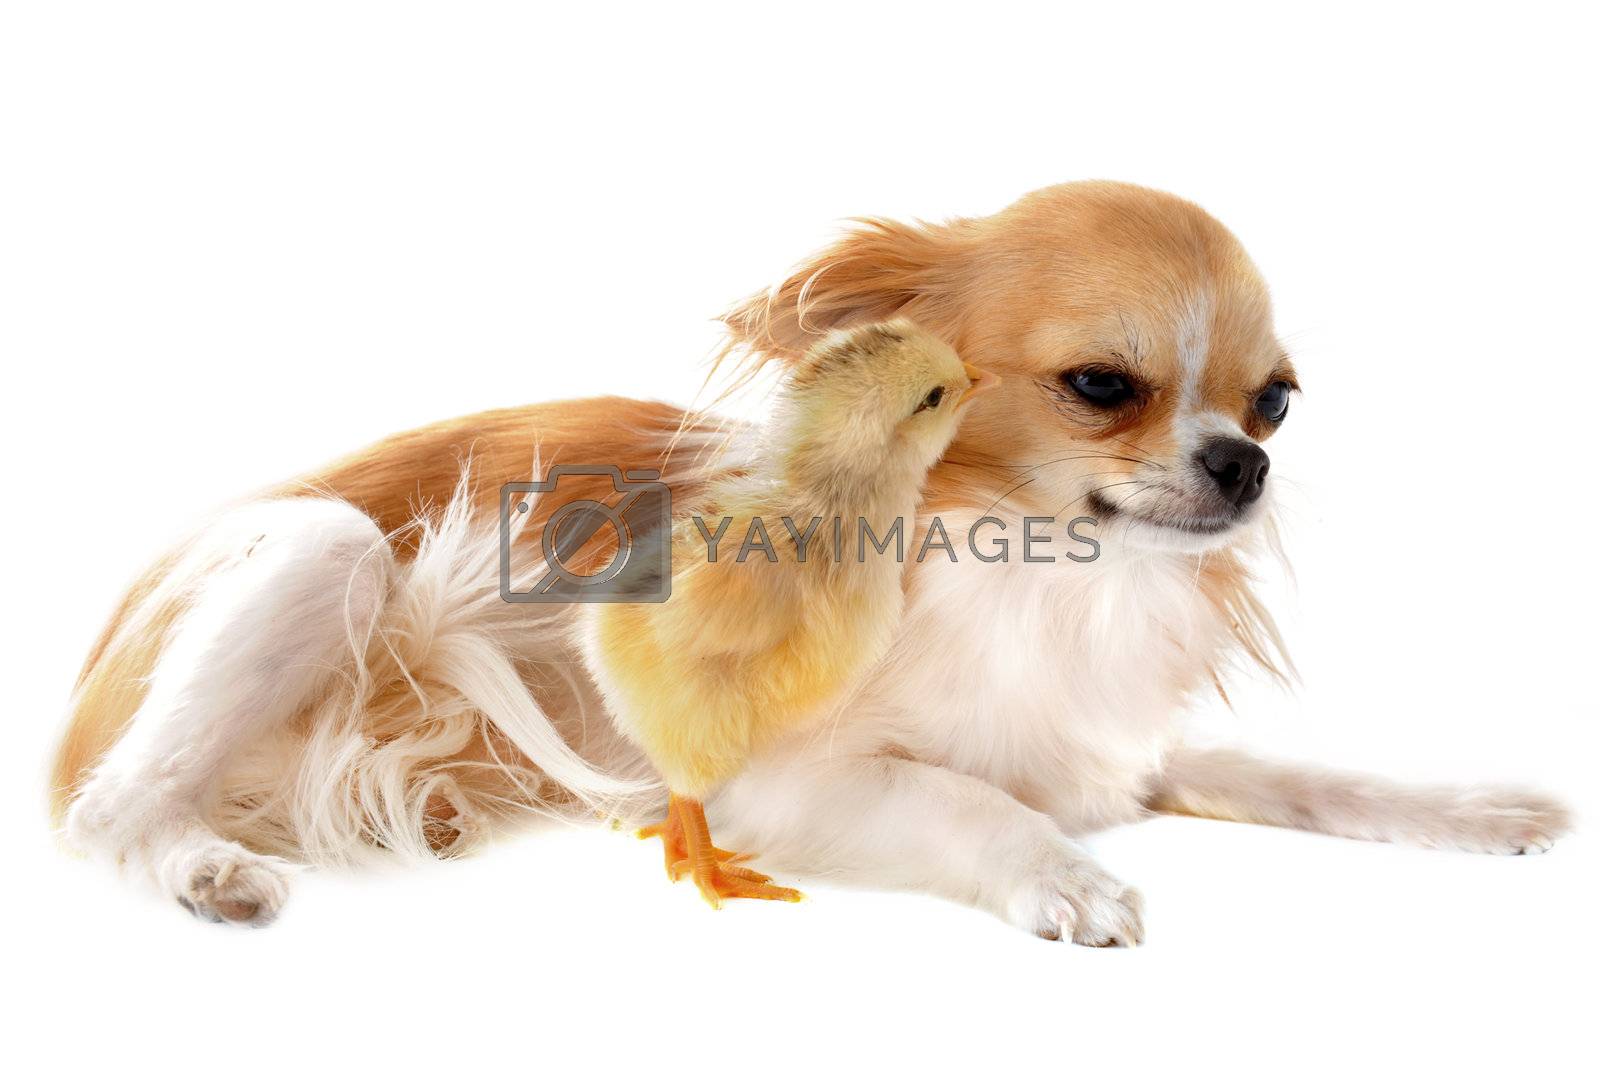 Royalty free image of chihuahua and chick by cynoclub